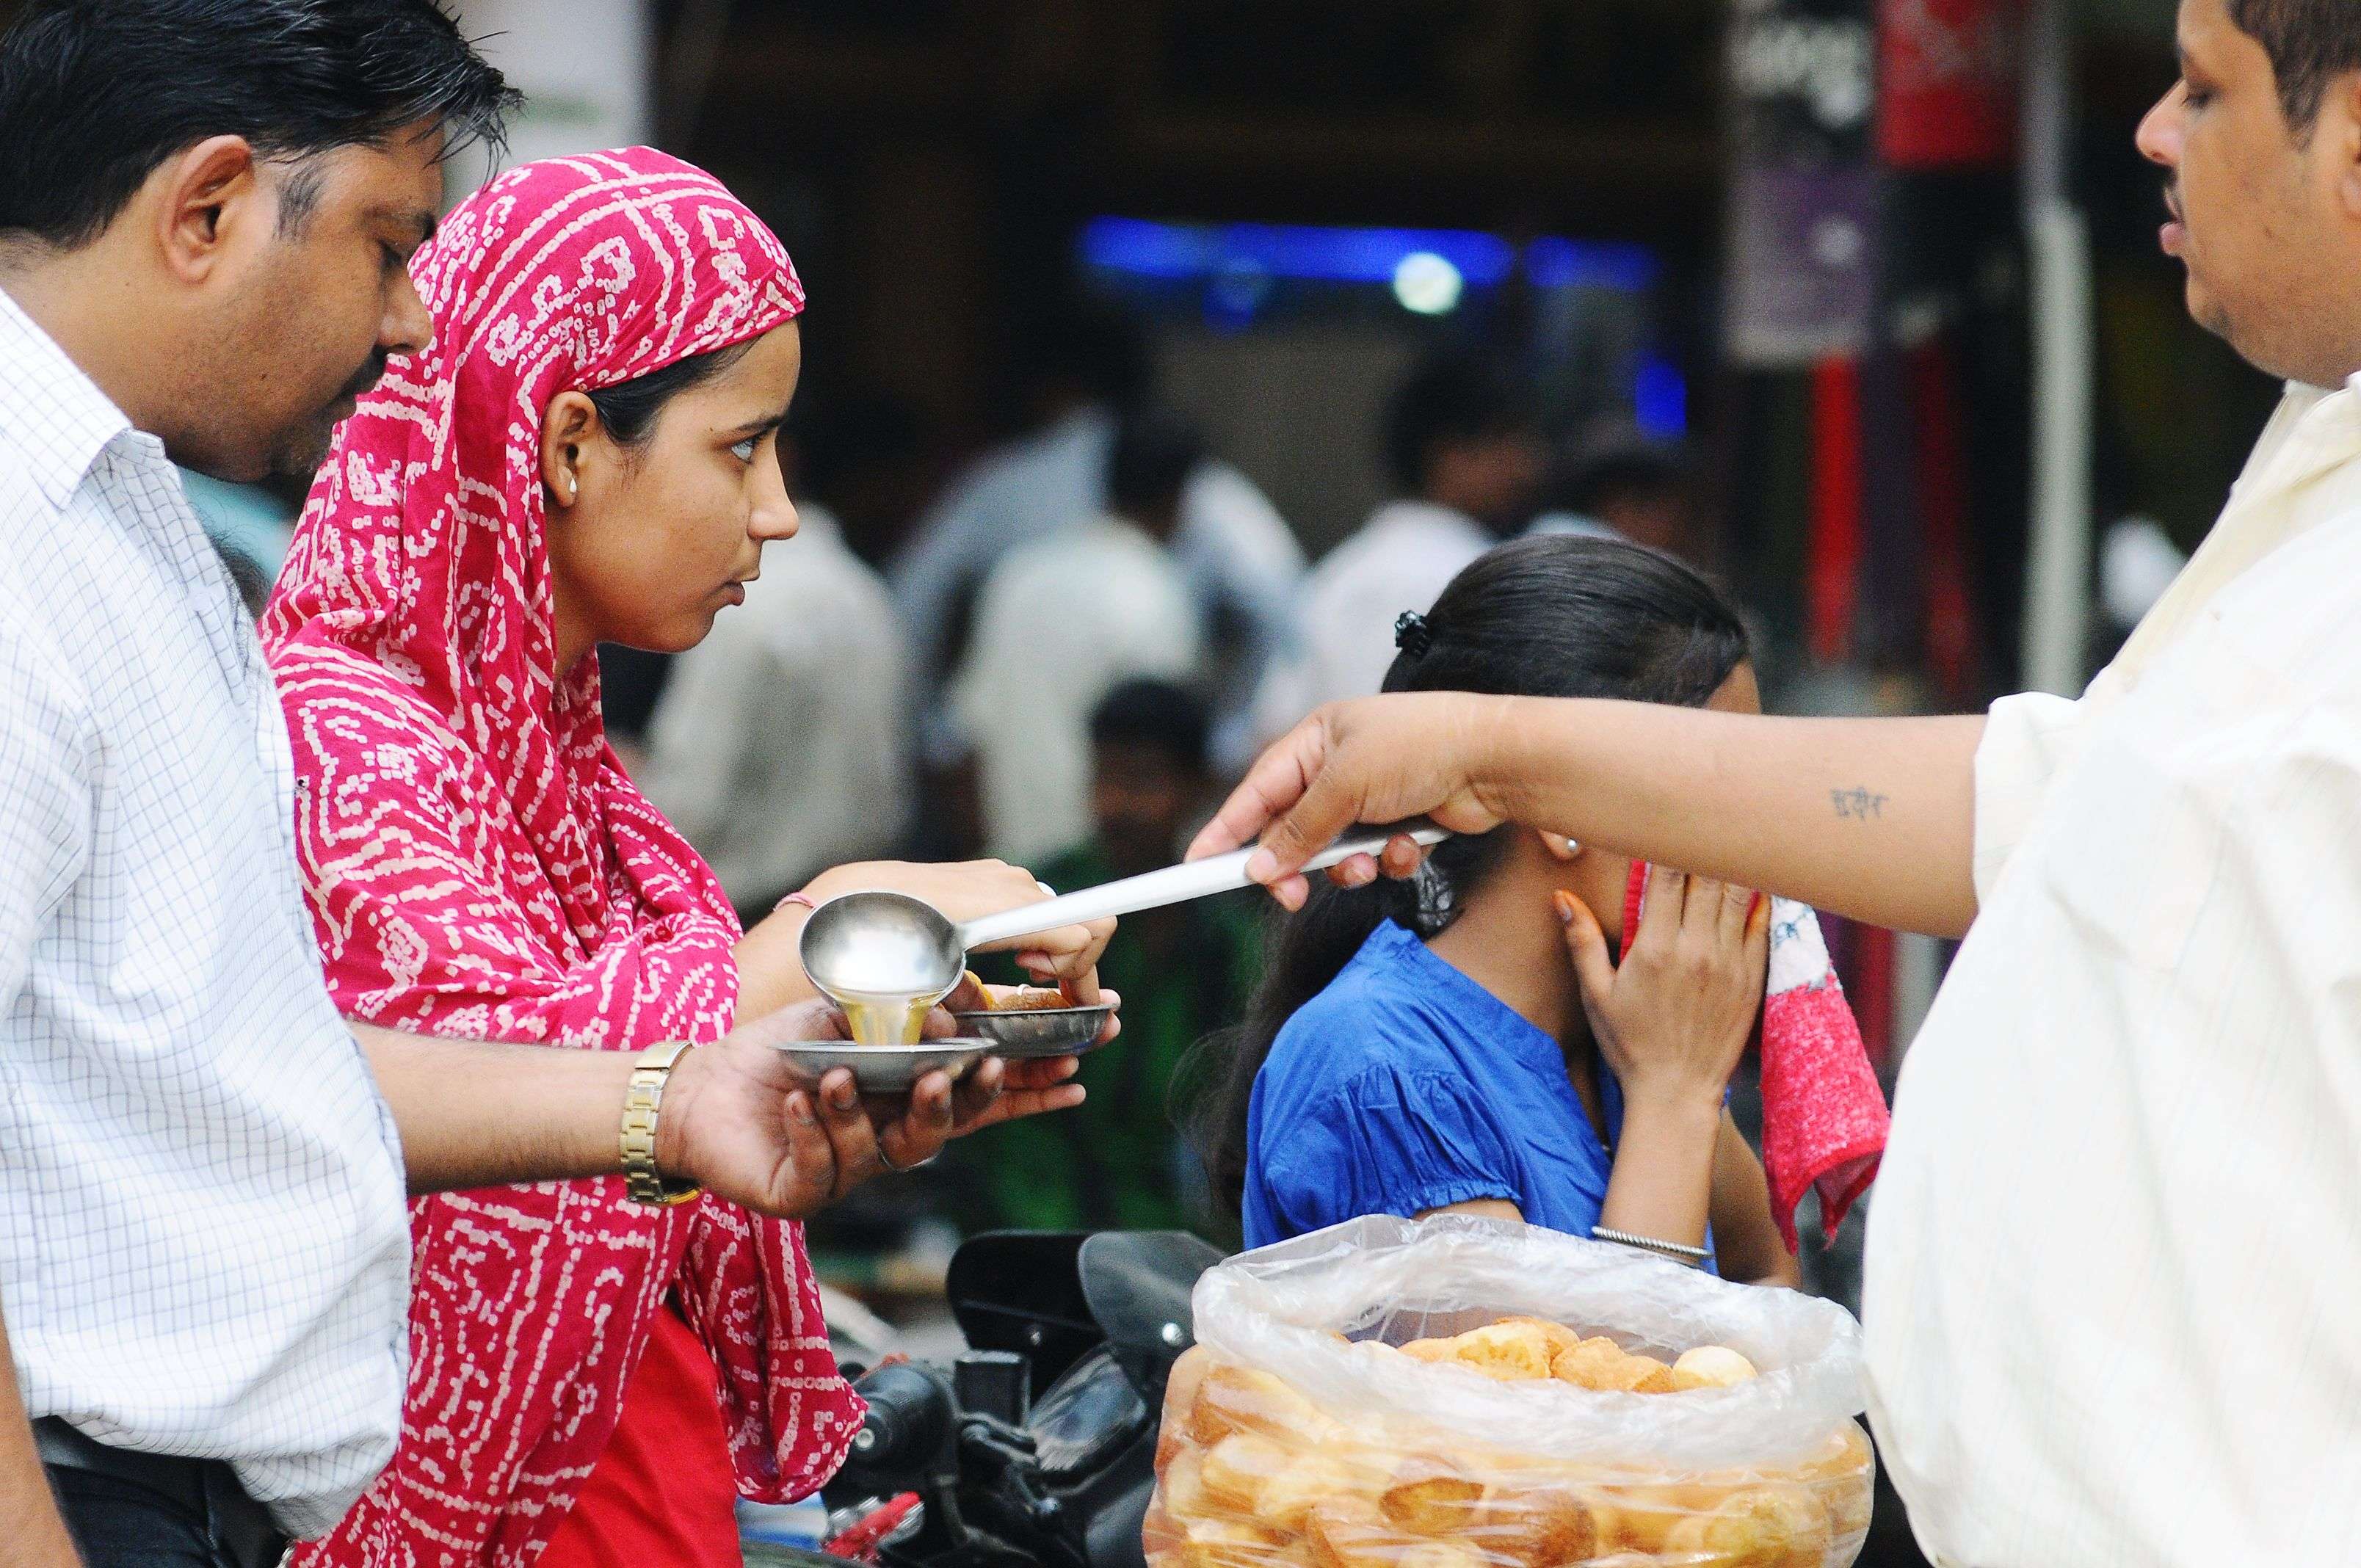 People eating golgappa (also known as pani-puri) in sec 22 at Chandigarh There is no check on sale of cut fruits due to poor enforcement by MC. Doctors warn against consumption of drinks served in unhygienic conditions as these could lead to health problems. photo: BALISH AHUJA